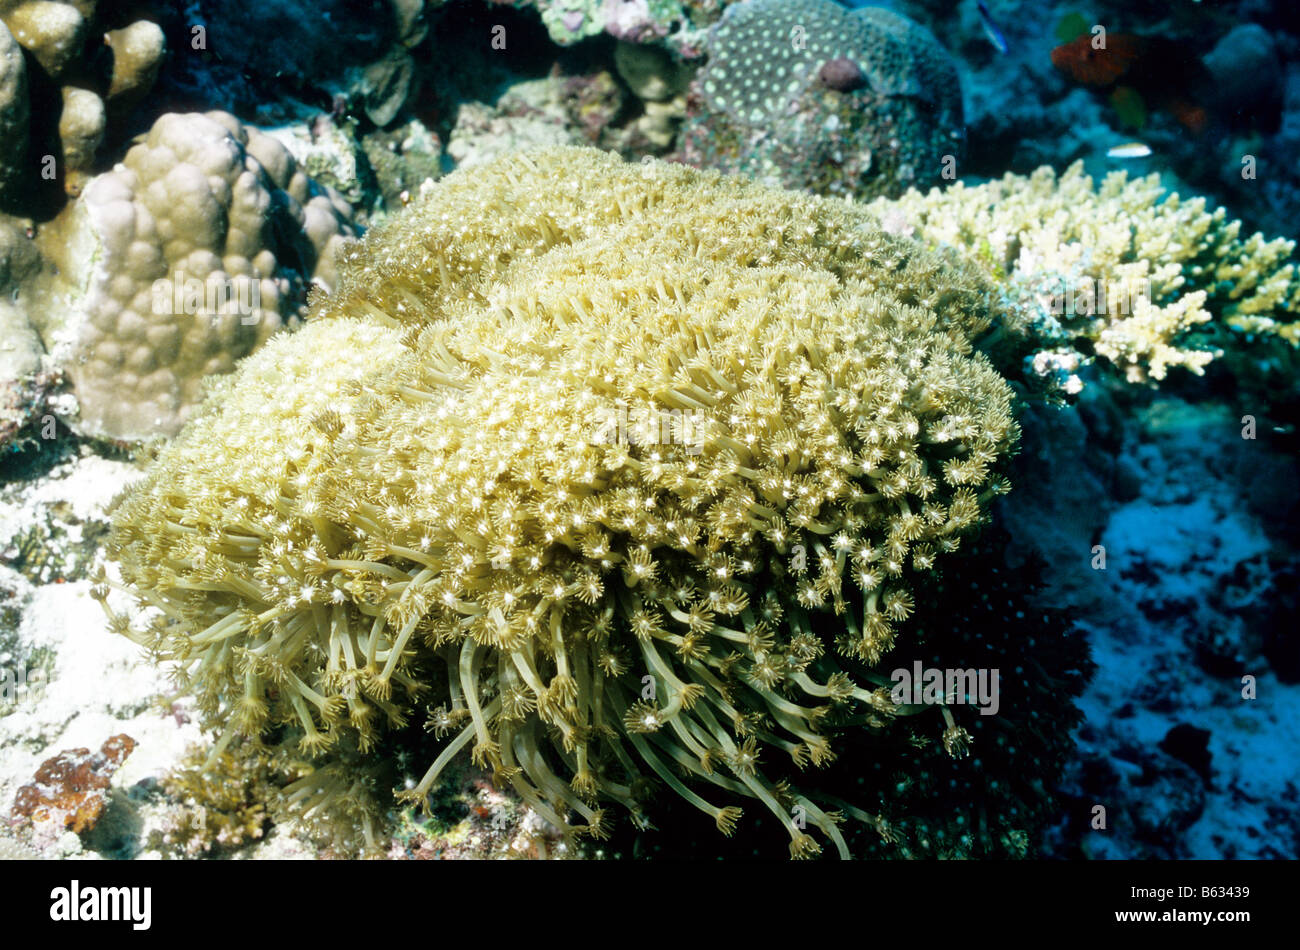 Long Polyp Leather Coral, surrounded by hard corals, underwater on a reef in the Maldives. Alcyonaria. Soft Corals. Stock Photo